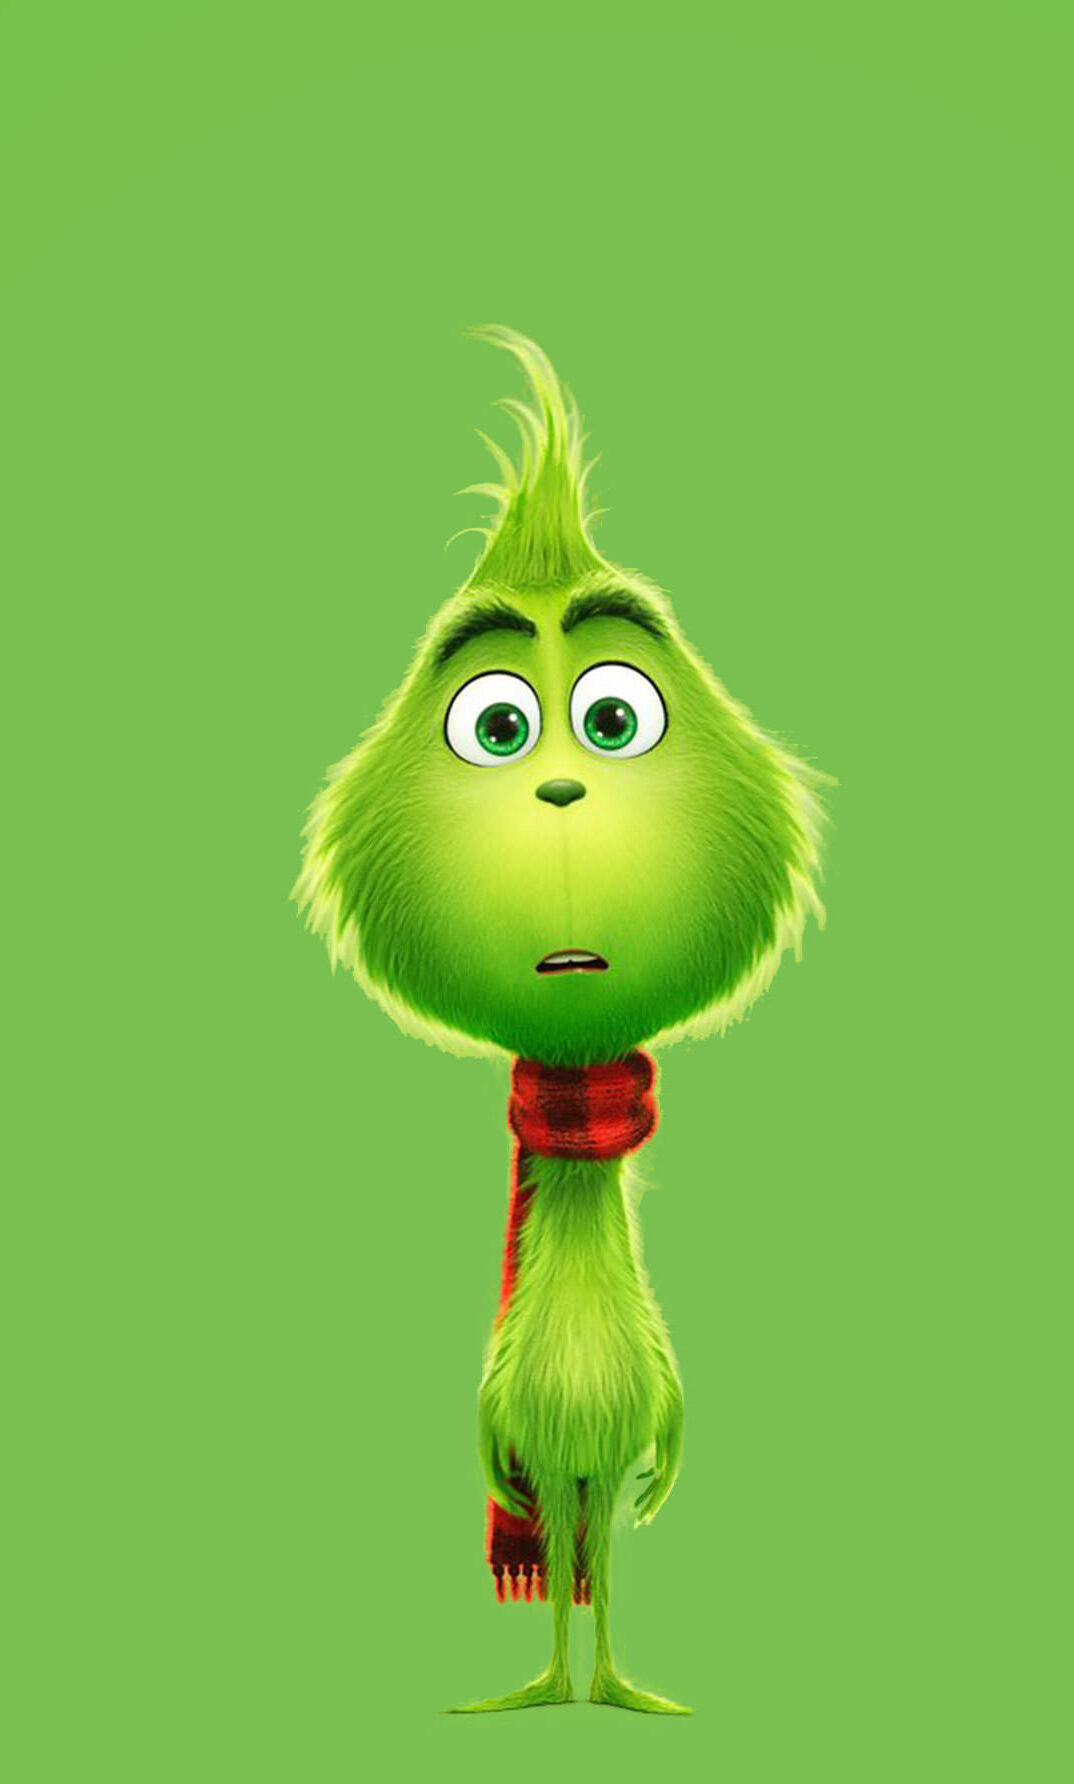 Lindooo  Christmas phone wallpaper Grinch images The grinch pictures